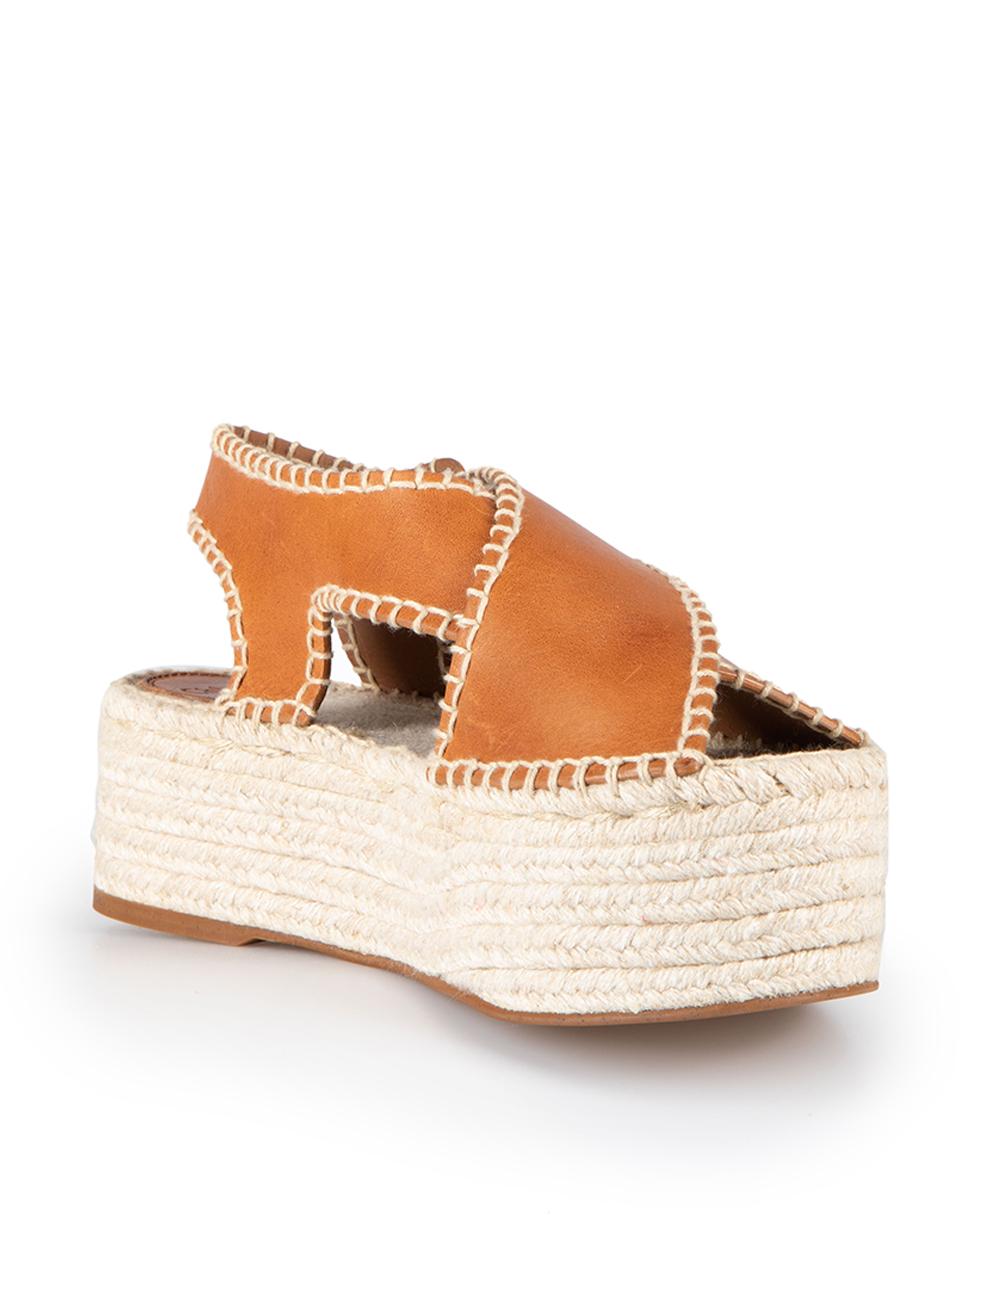 CONDITION is Never Worn. Visible wear to shoes is evident to both with scuff marks at the leather strapping due to poor storage on this used Chloé designer resale item.



Details


Brown

Leather

Platform espadrille sandals

Whip stitch